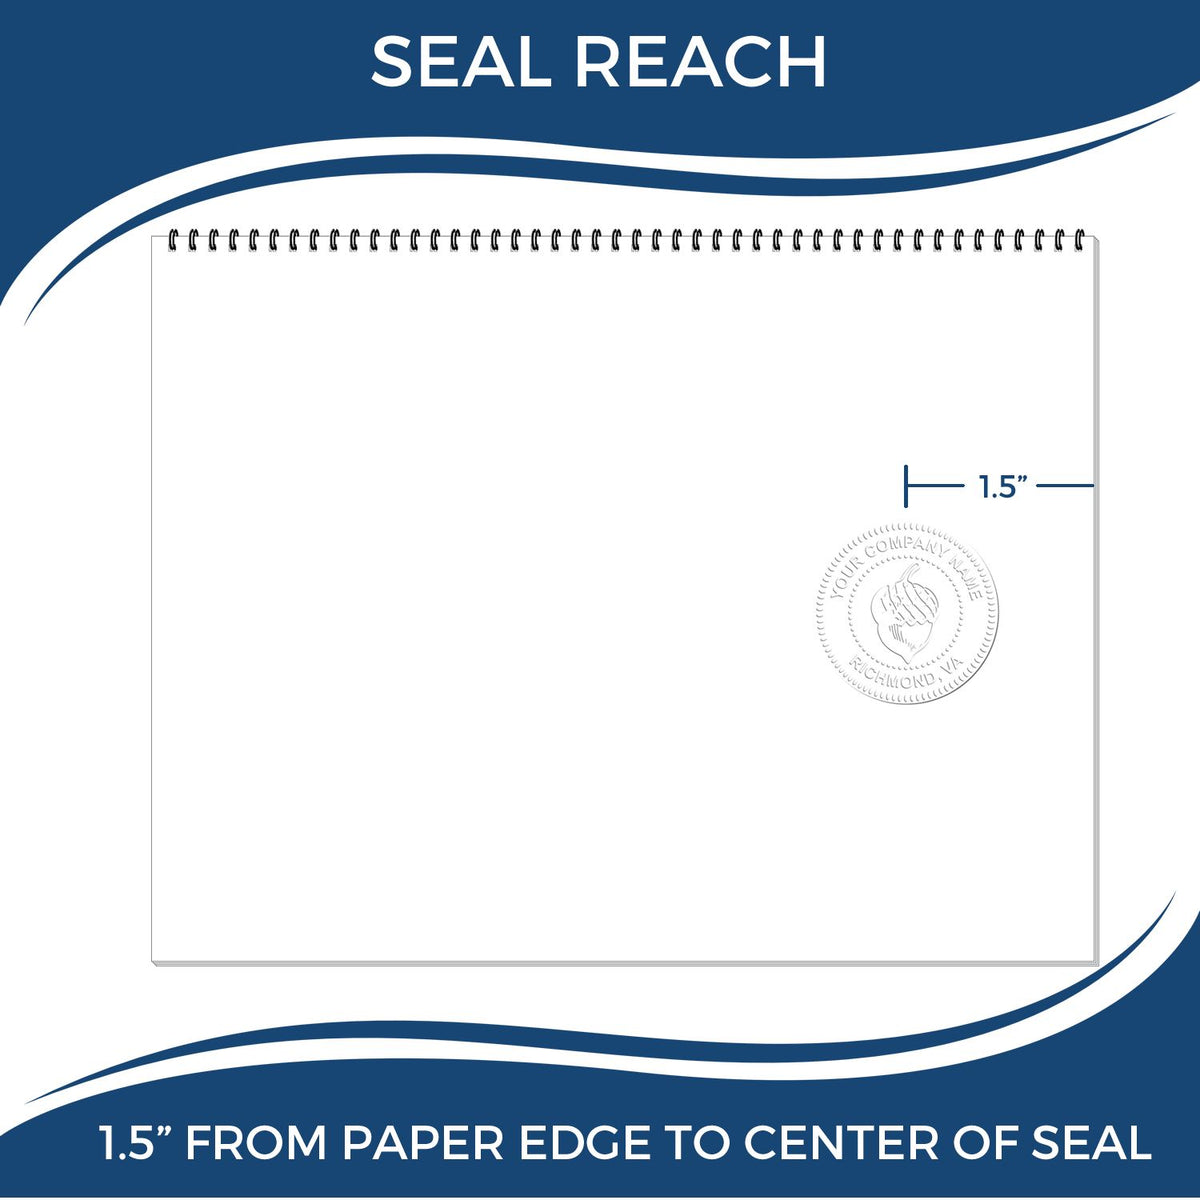 An infographic showing the seal reach which is represented by a ruler and a miniature seal image of the Texas Desk Architect Embossing Seal